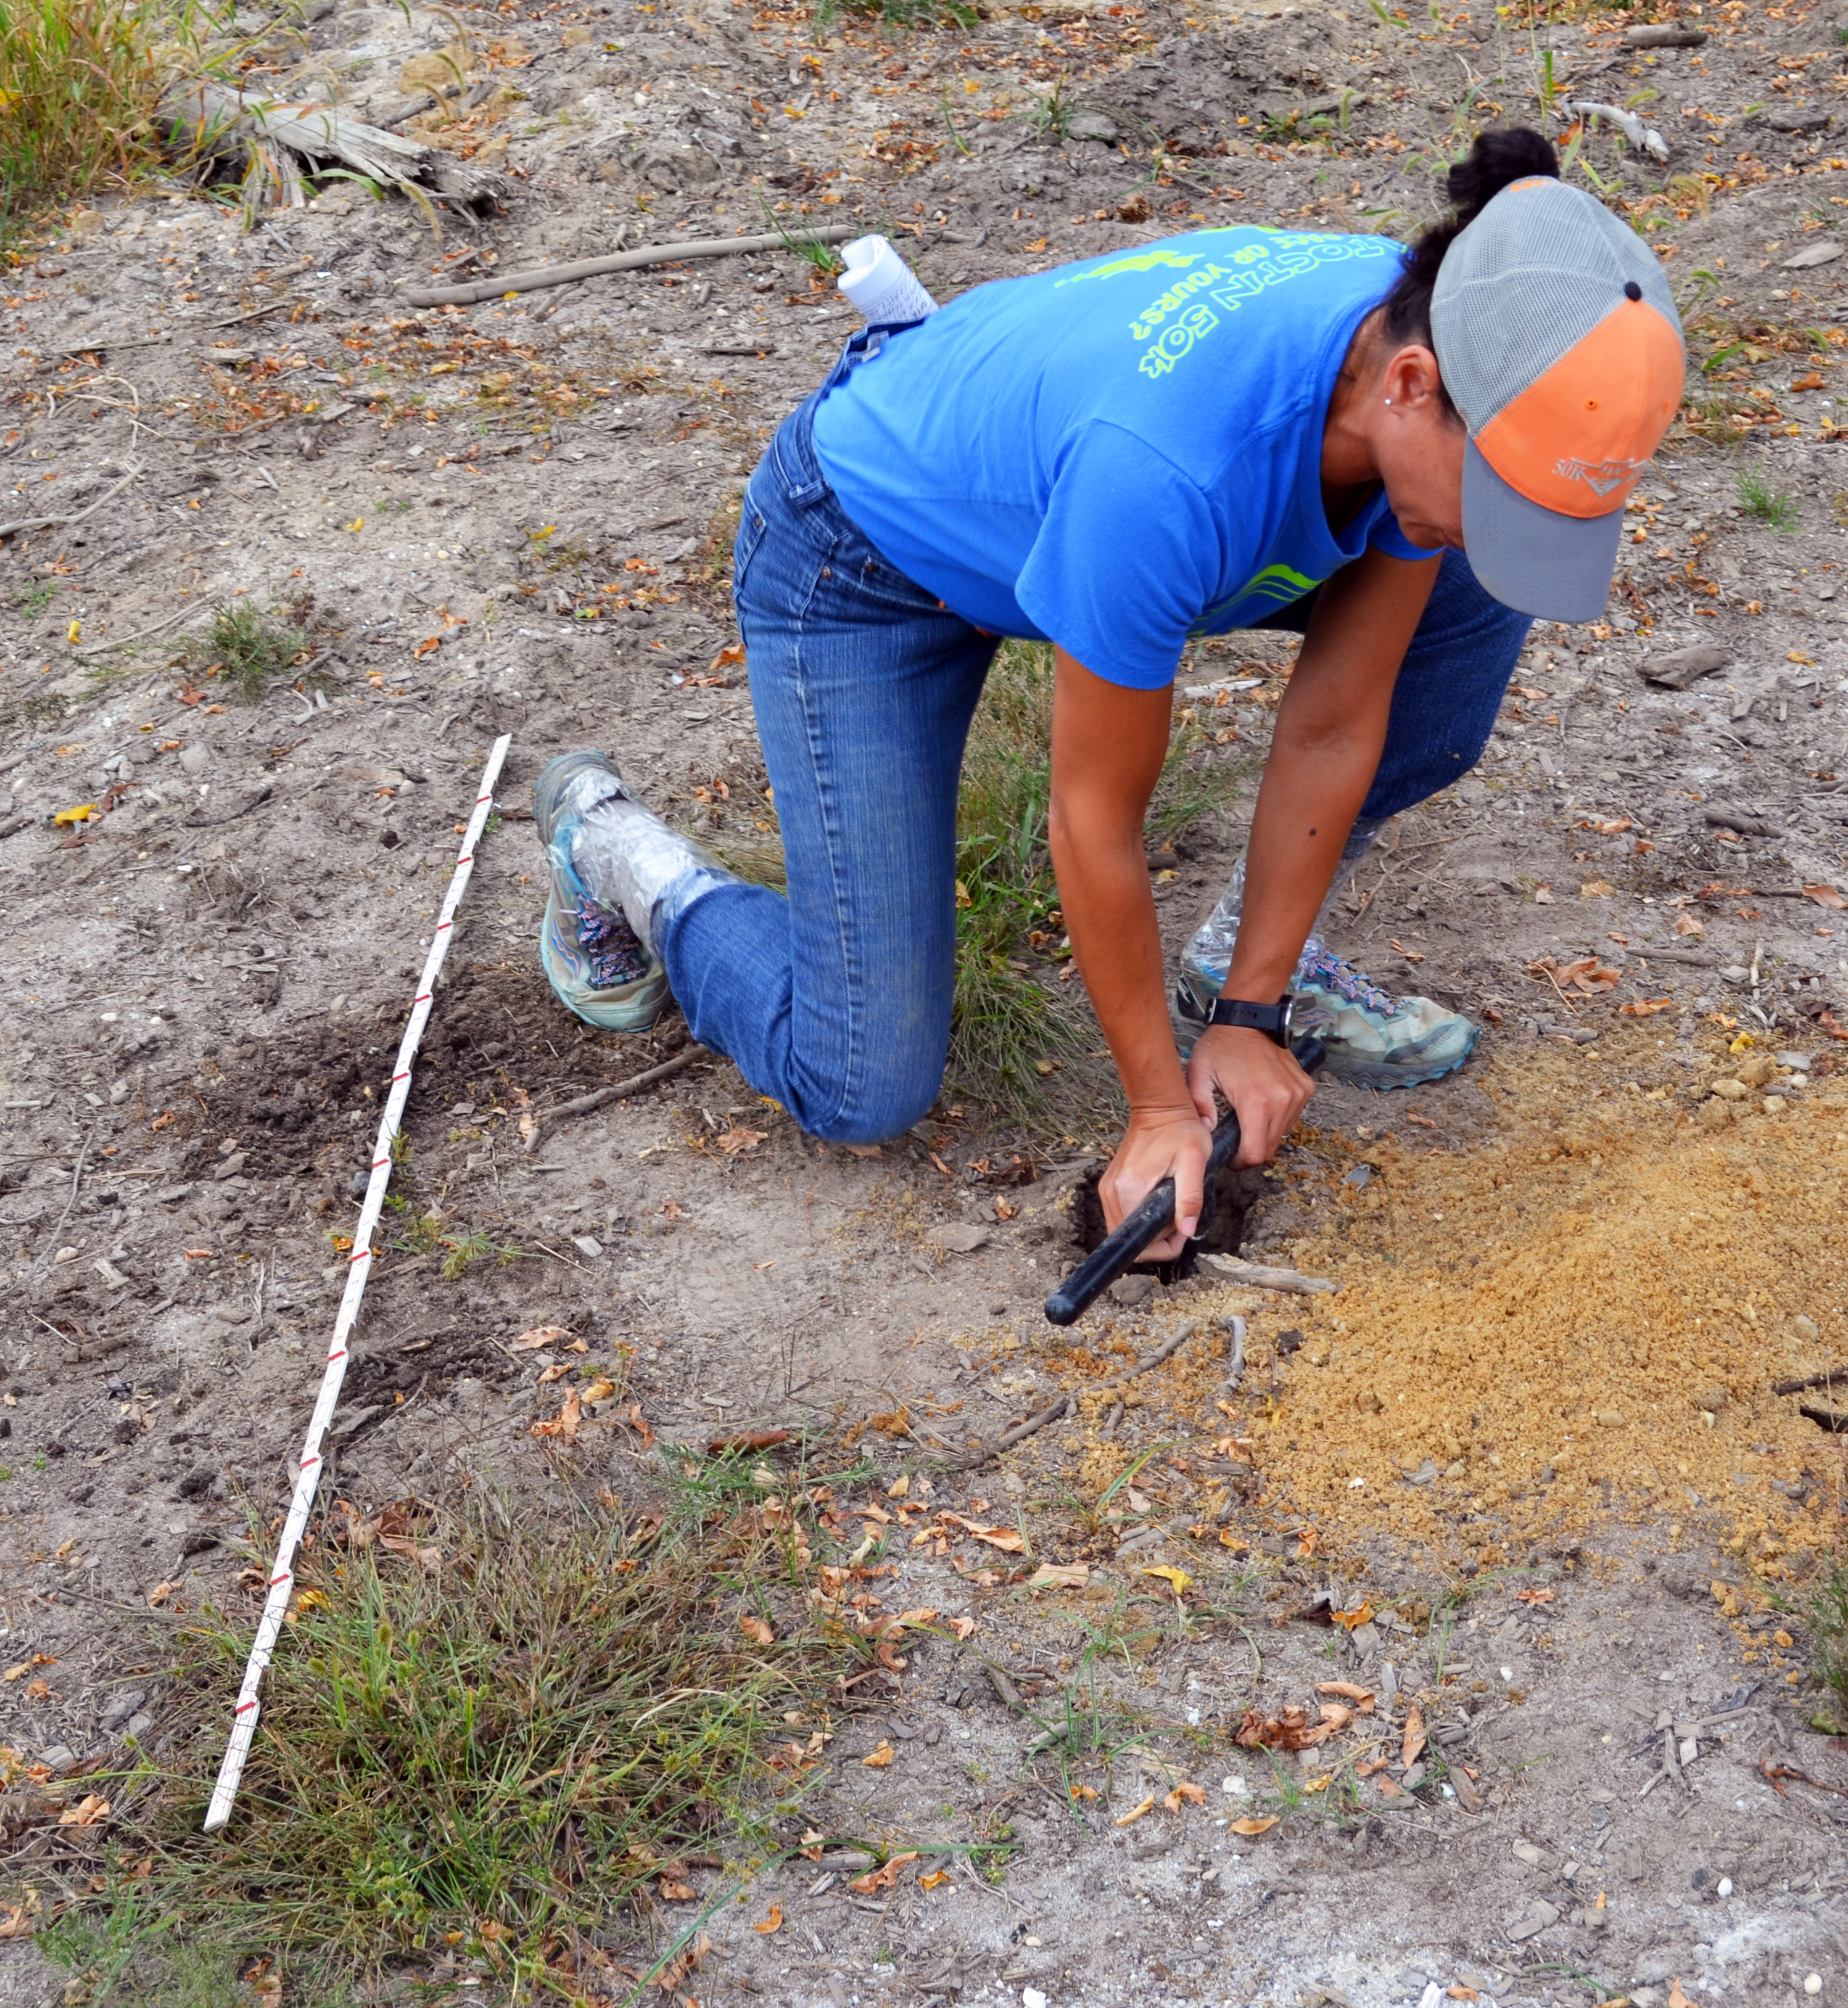 A Pinelands Commission staff member taking soil borings